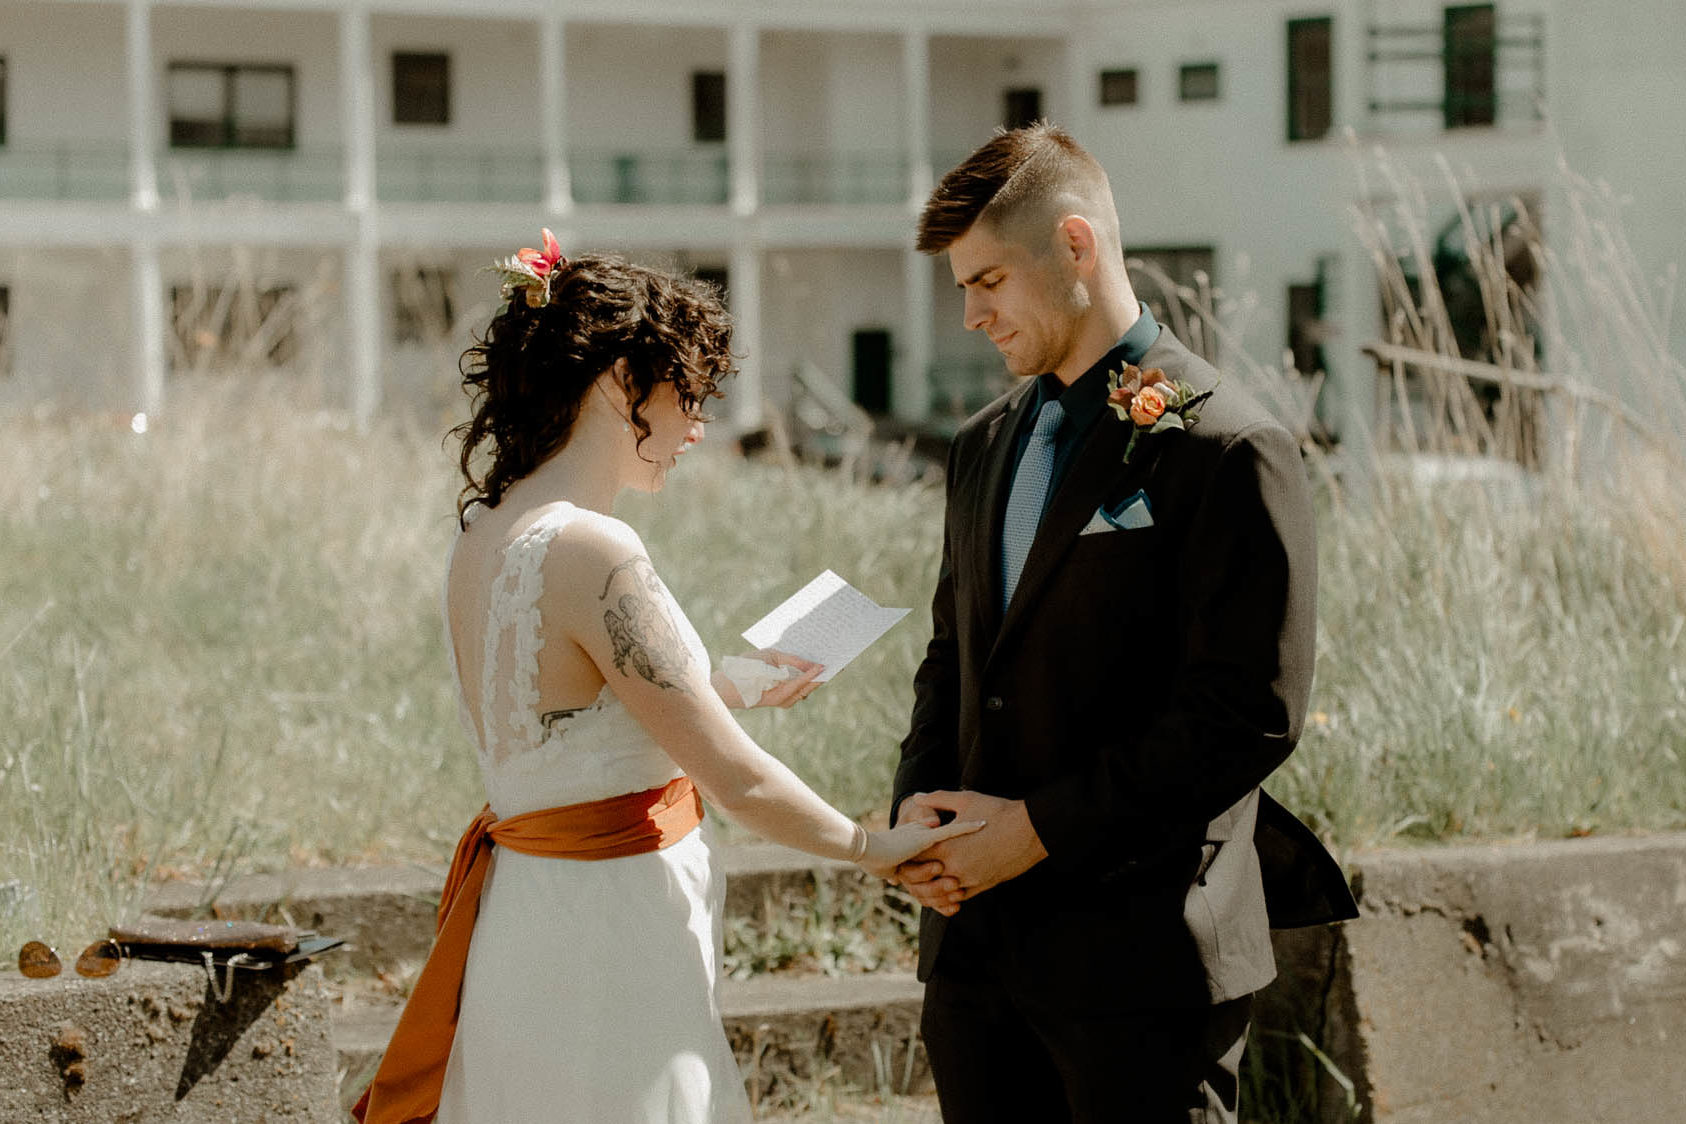 Non-traditional elopement wedding at Fort Worden State Park in Port Townsend